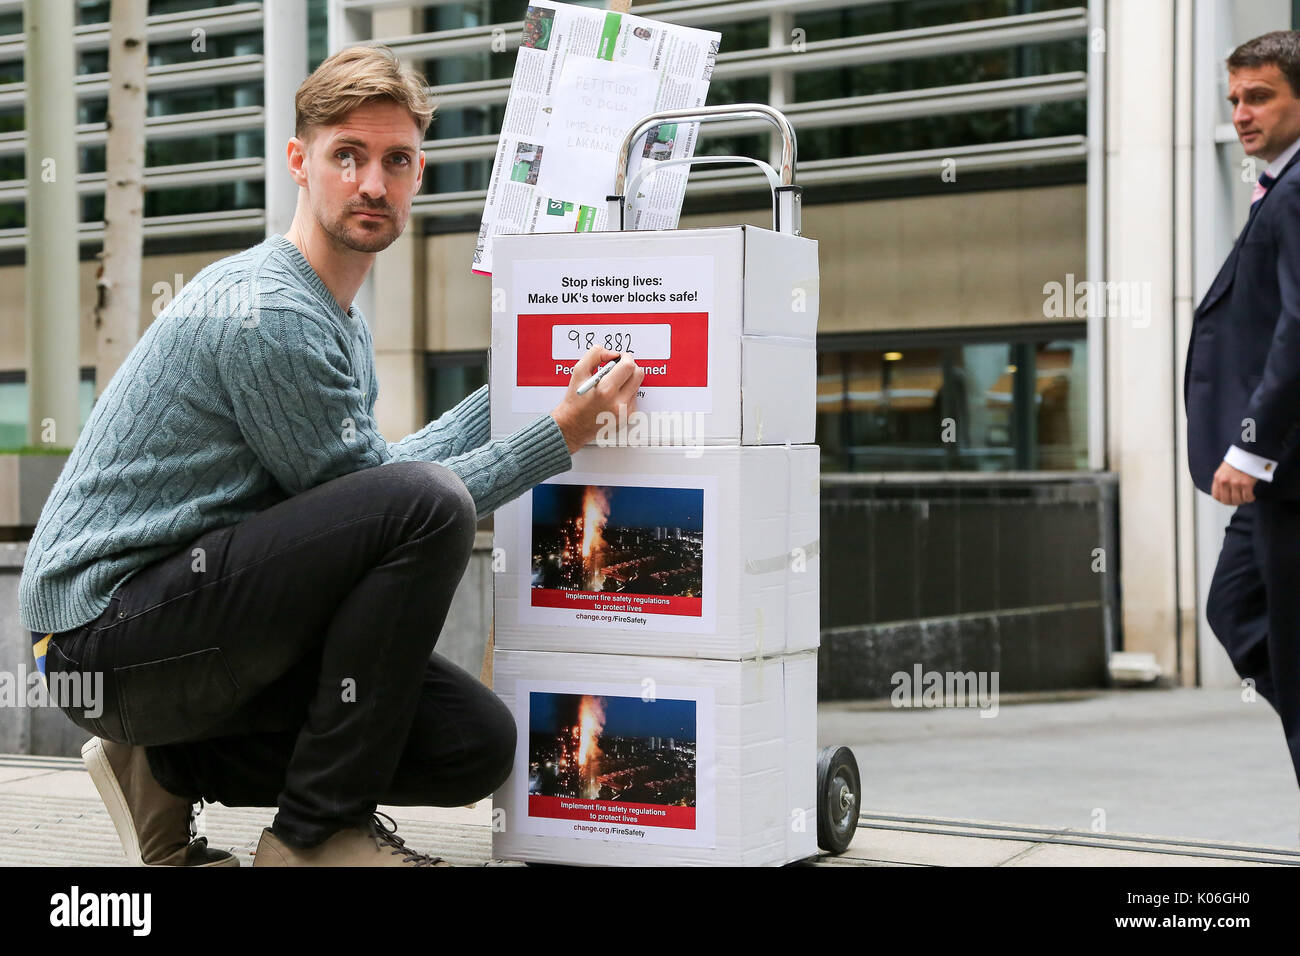 Westminster. London, UK. 22nd Aug, 2017. John Tyson, the founder of a petition to bring in fire safety regulations to make Britain's tower blocks safer poses for media before handing in the petition to the Department for Communities and Local Government (DCLG). The petition of 98,882 signatures to the DCLG follows the critical findings of the 2013 coroner's report on the 2009 Lakanal fire, which highlighted issues that could have prevented Grenfell, the petition is asking for the immediate implementation of recommendations from that report. Credit: Dinendra Haria/Alamy Live News Stock Photo